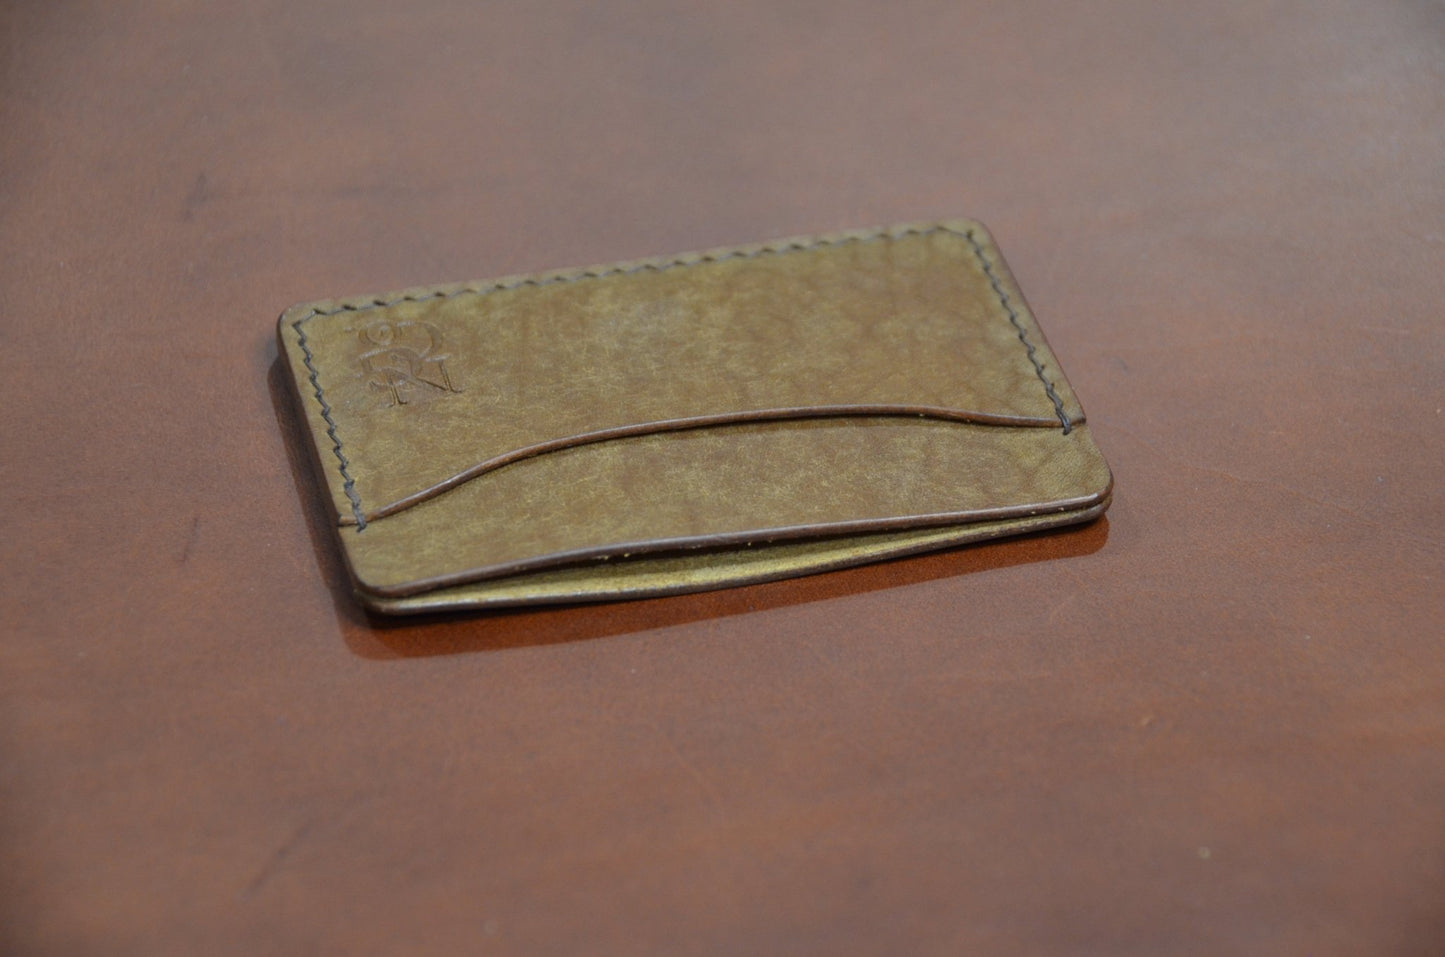 Minimalist Leather Card Holder - NATS GOODS CO.